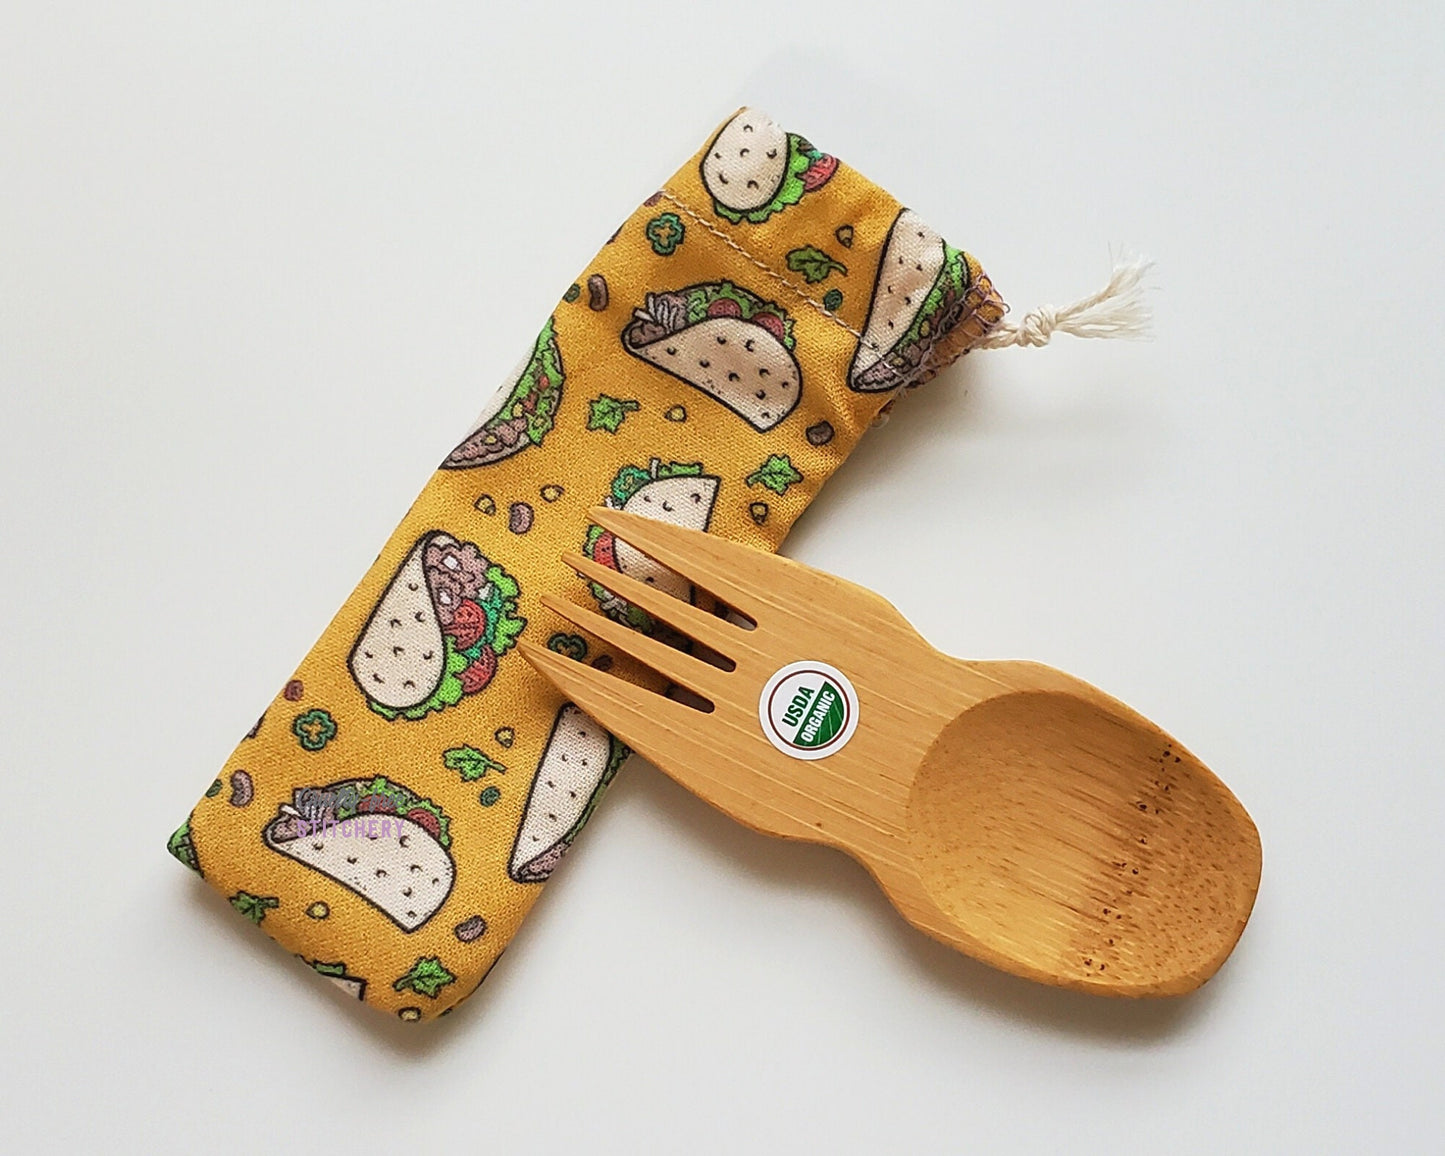 Yellow taco print reusable spork pouch. The pouch is sitting diagonally with the spork partially on top pointing the other way. The fork end of the spork is pointing to the left.